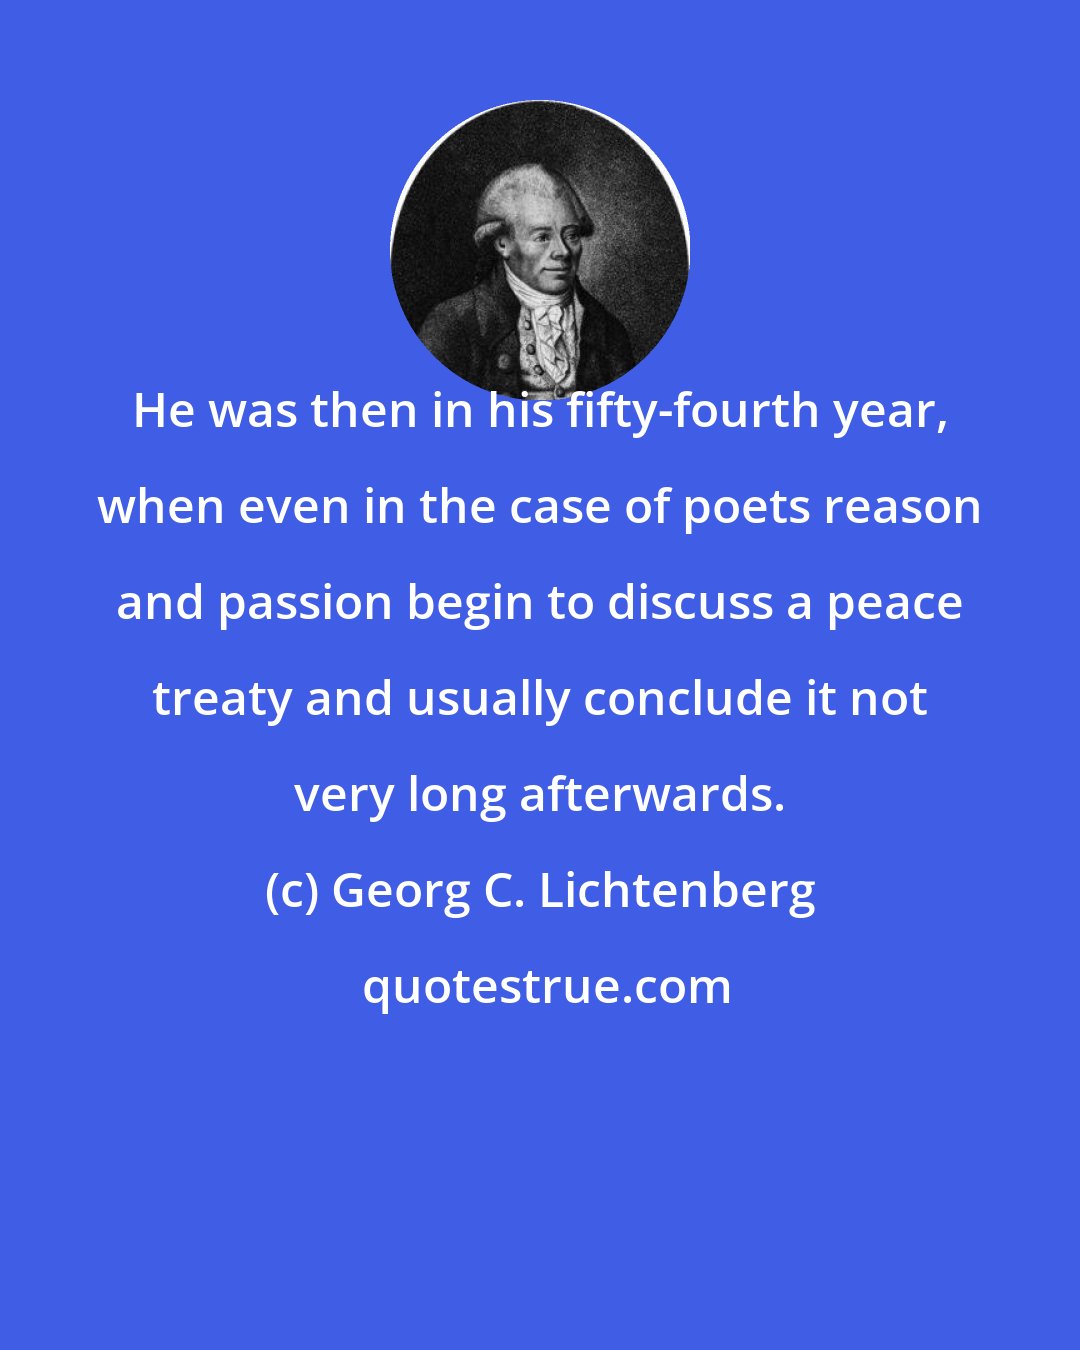 Georg C. Lichtenberg: He was then in his fifty-fourth year, when even in the case of poets reason and passion begin to discuss a peace treaty and usually conclude it not very long afterwards.